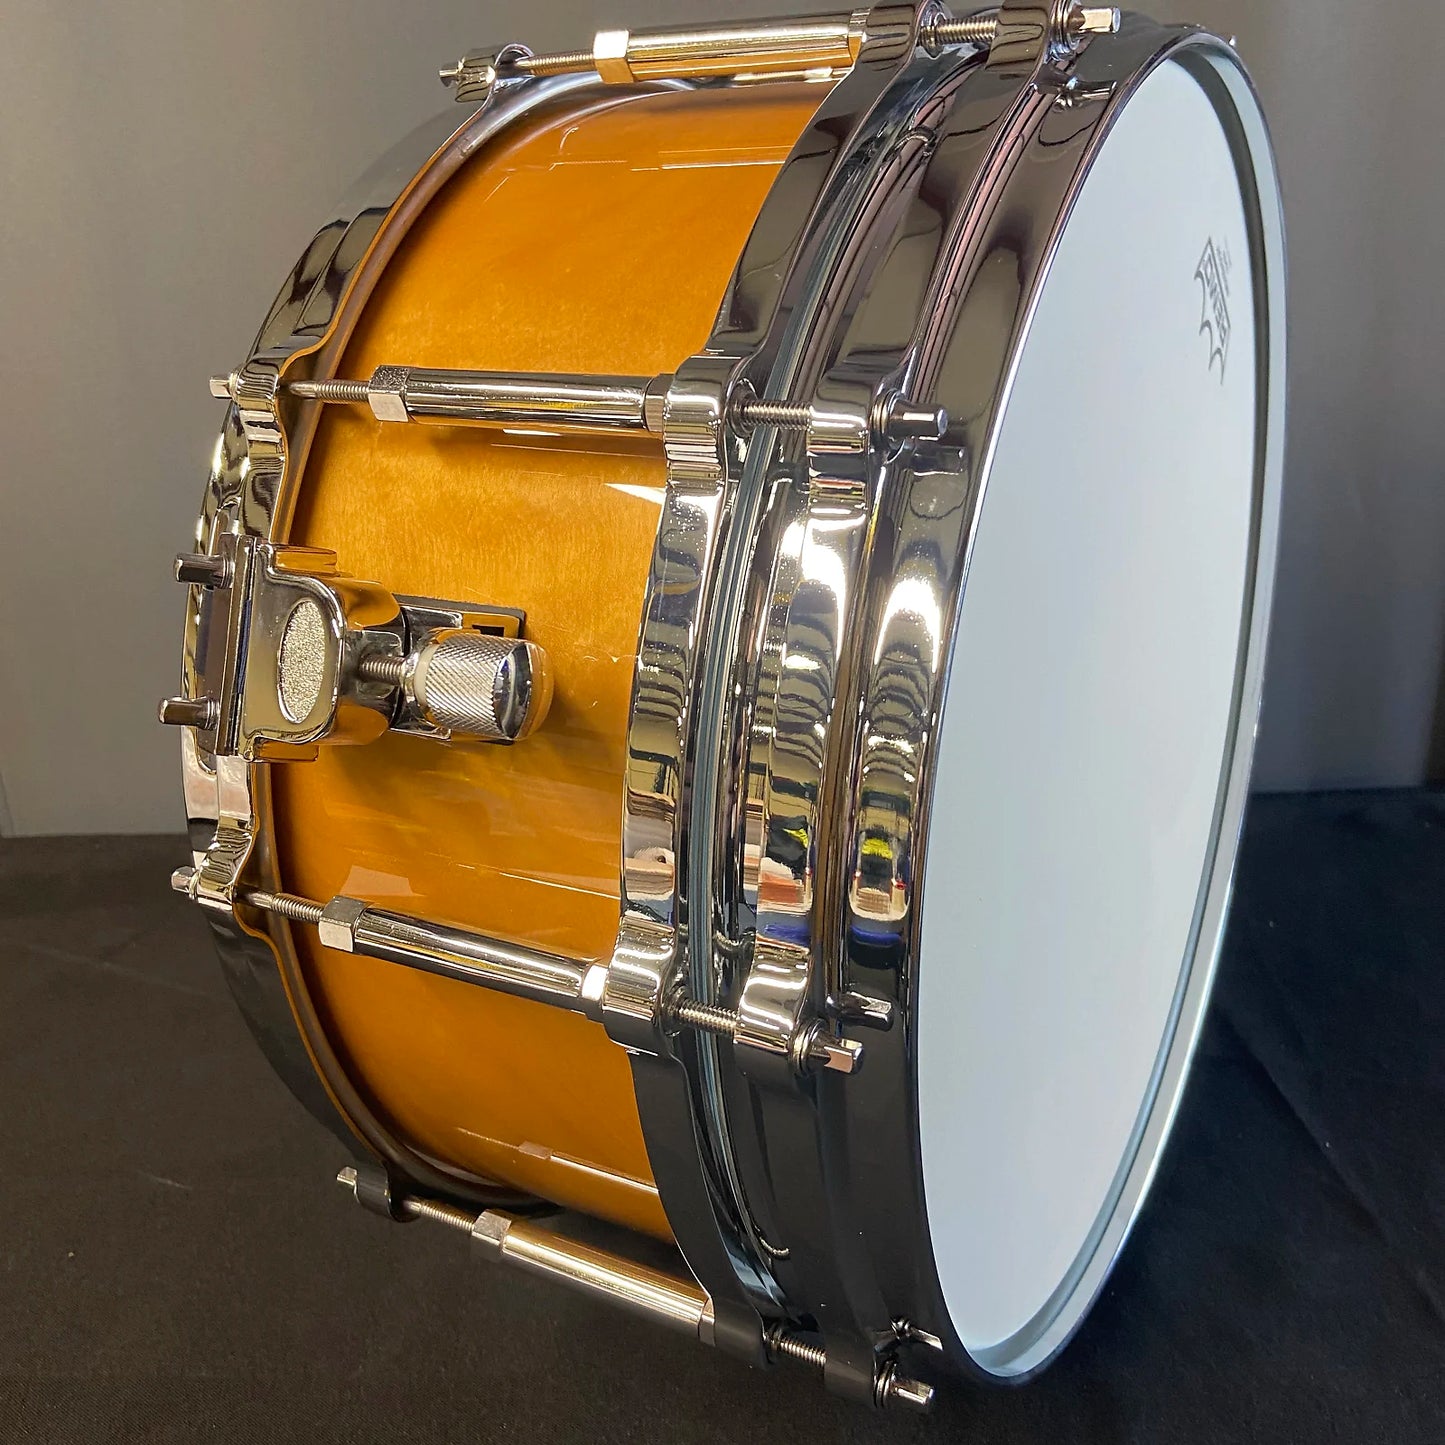 Birch Free Floater Snare Drum